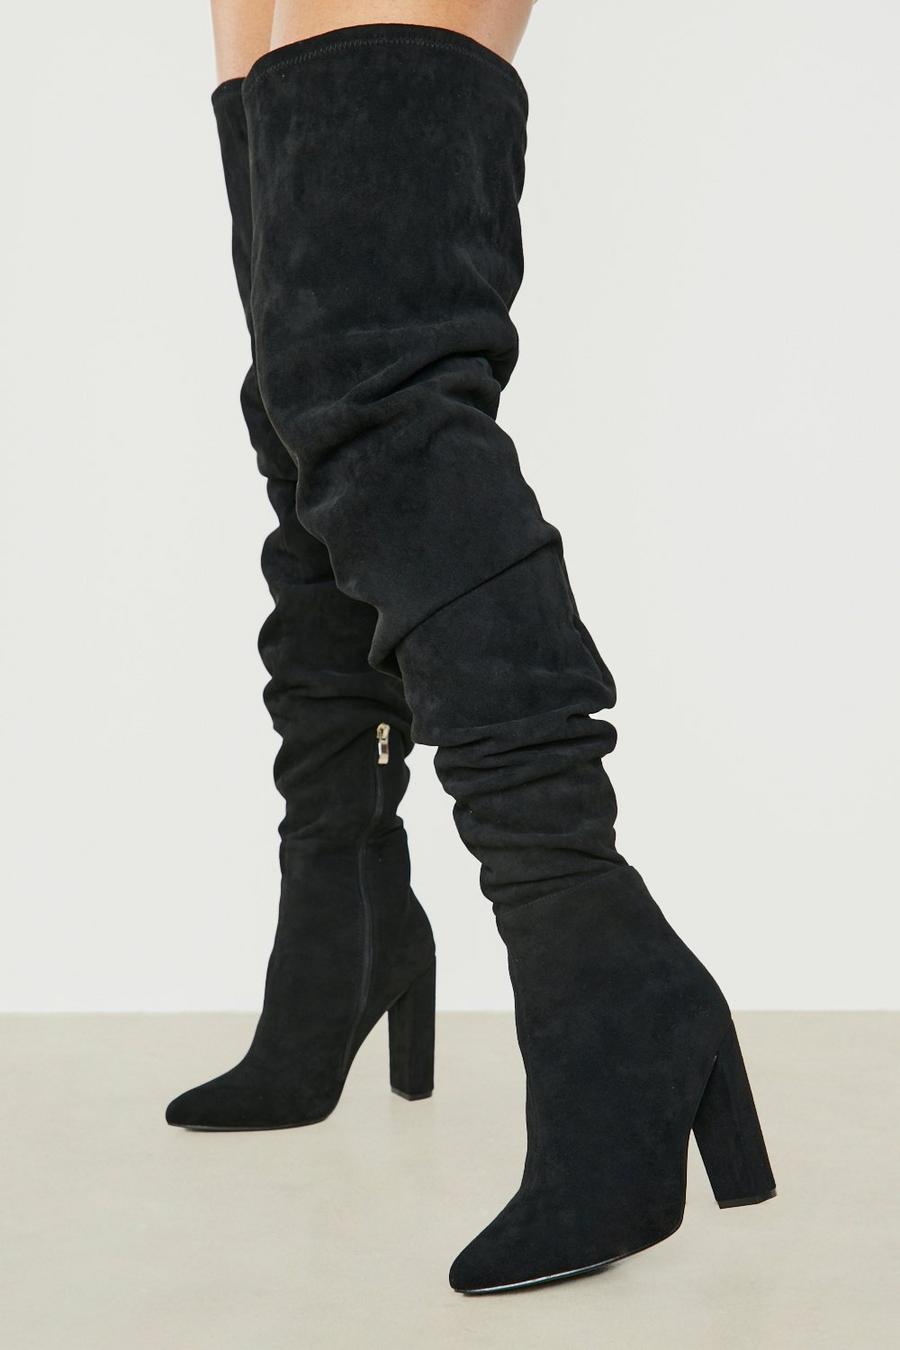 Black Super Thigh High Ruched Heeled Boots